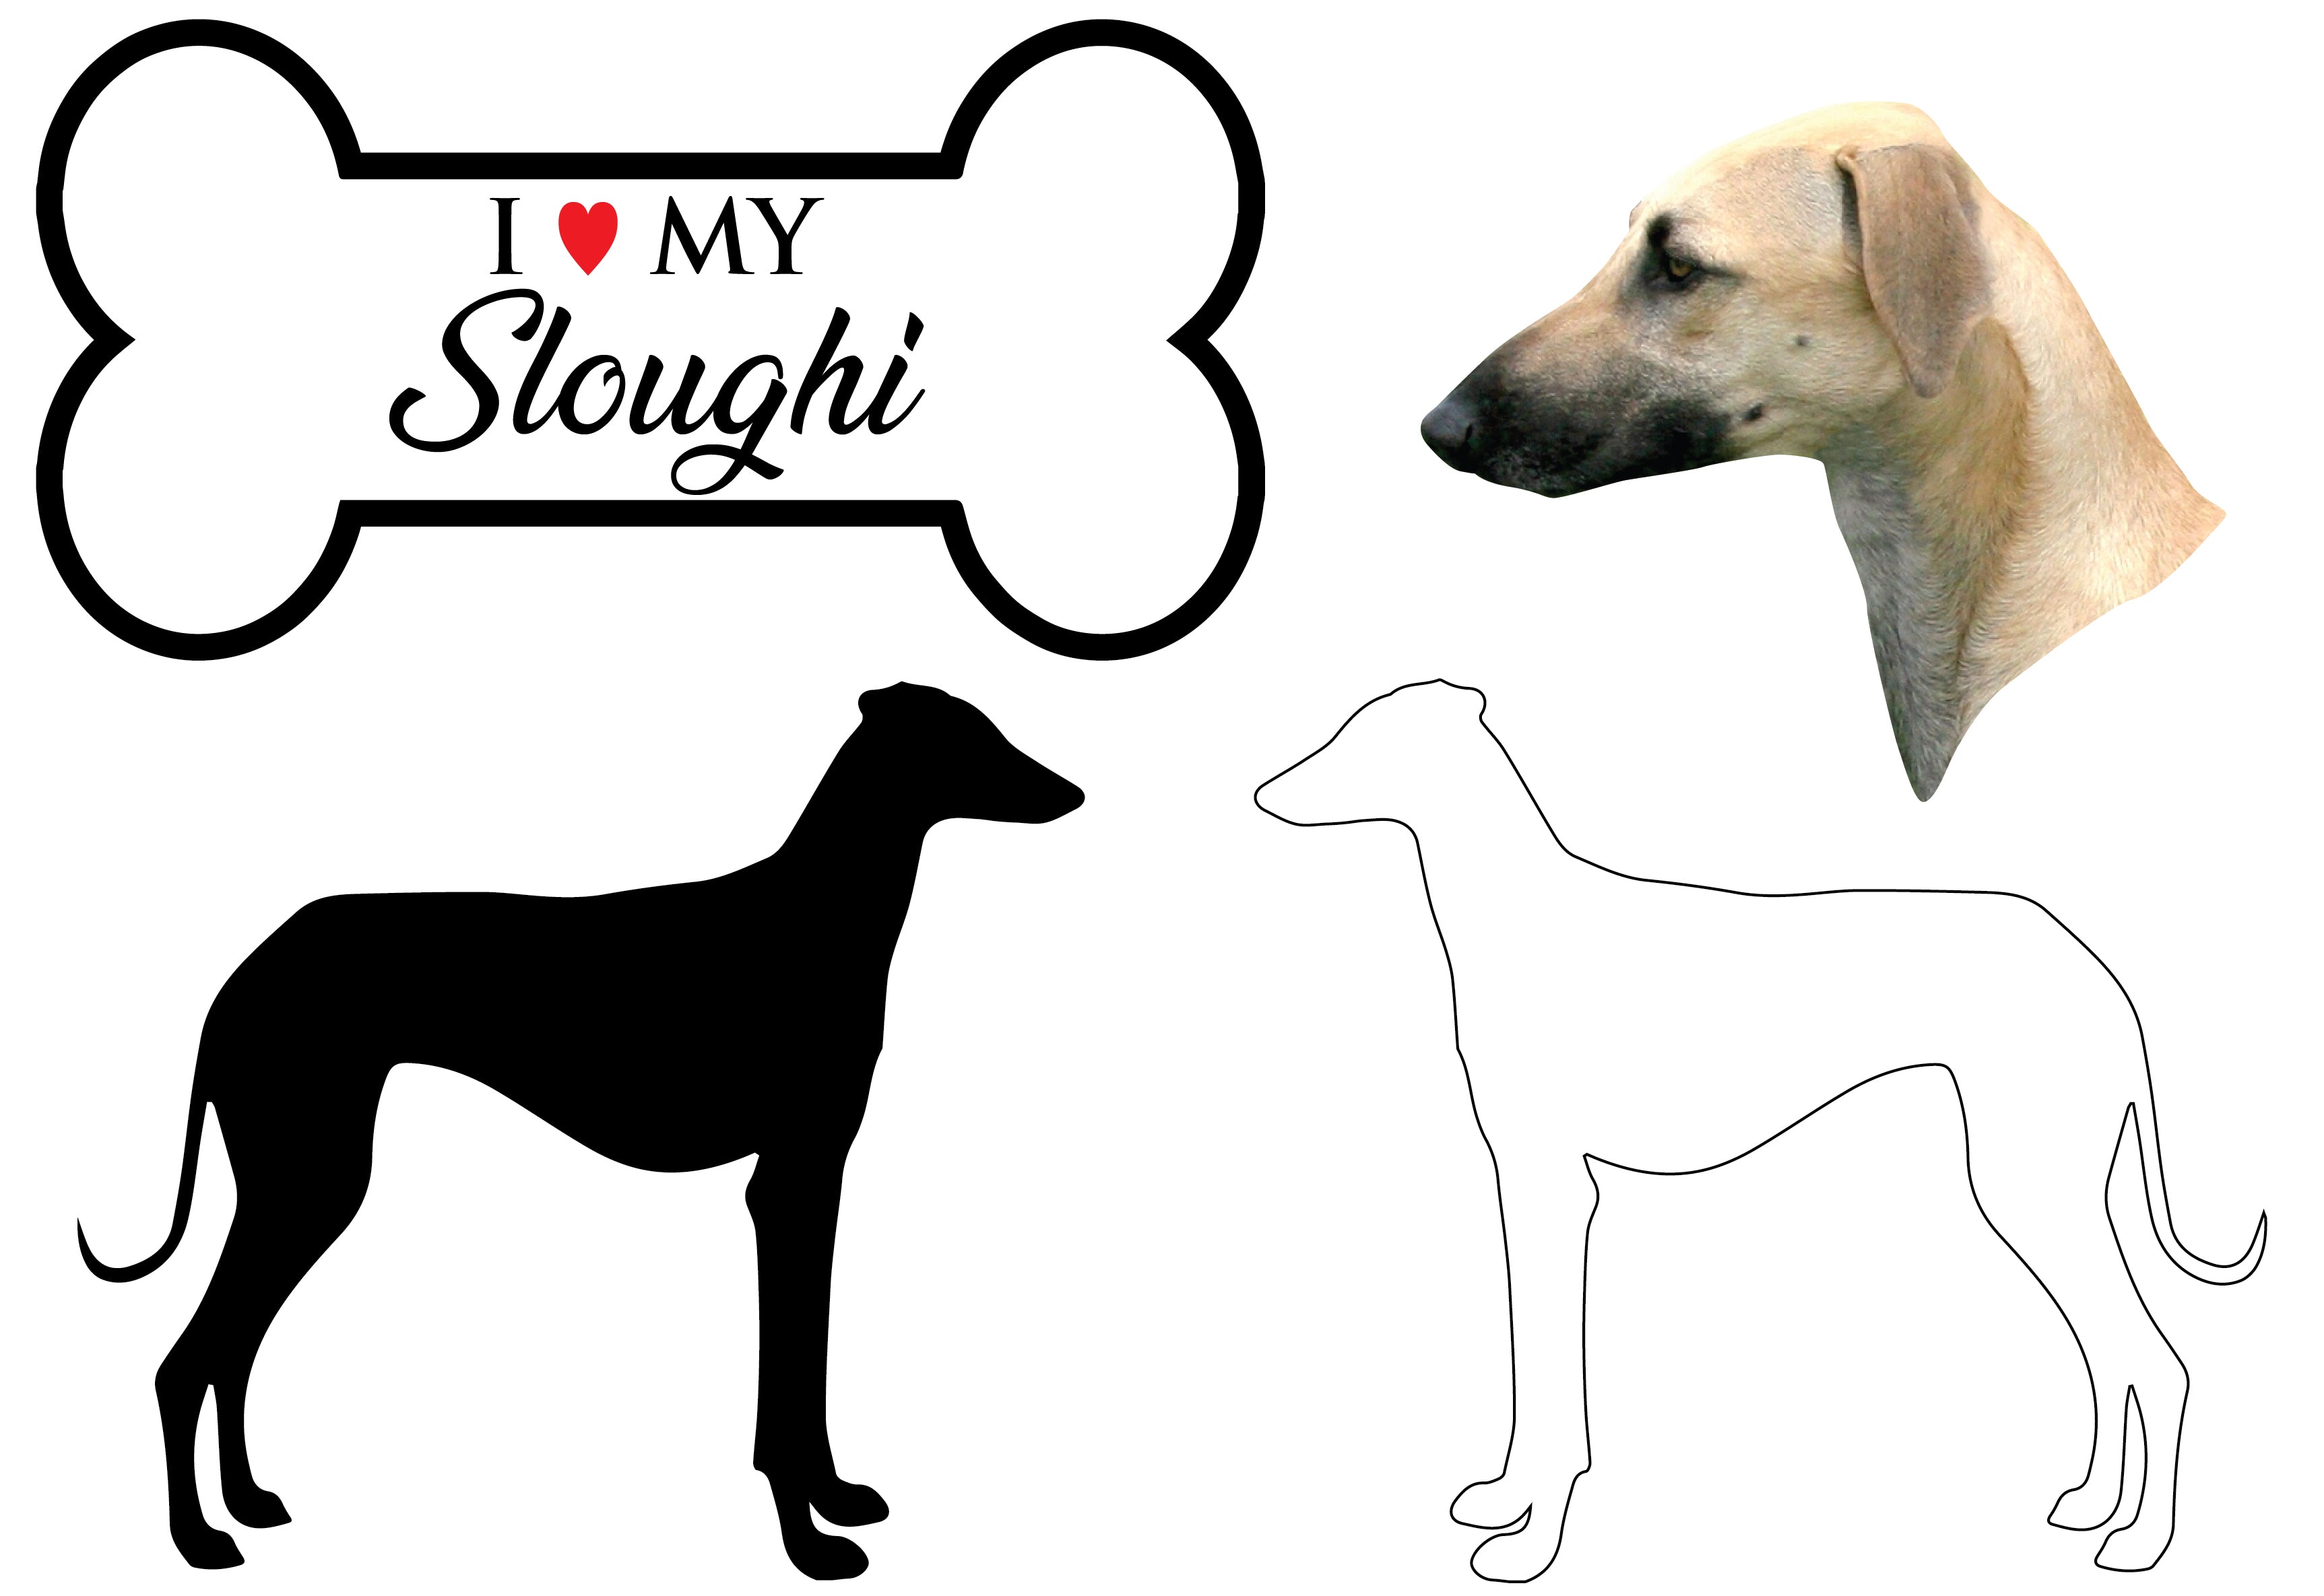 Sloughi - Dog Breed Decals (Set of 16) - Sizes in Description